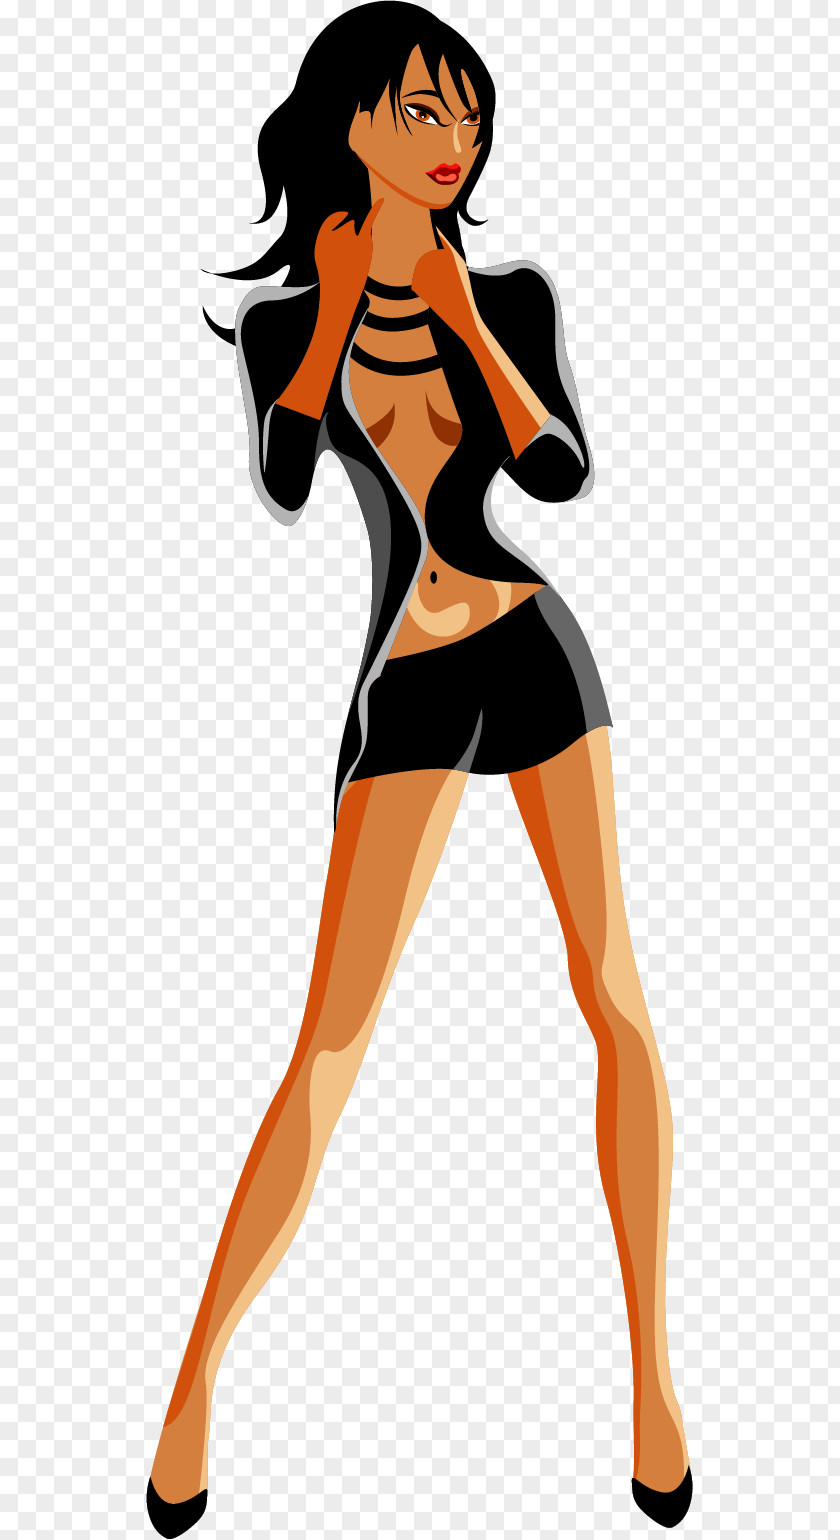 Adobe Illustrator Cartoon PNG Cartoon, painted sexy woman clipart PNG